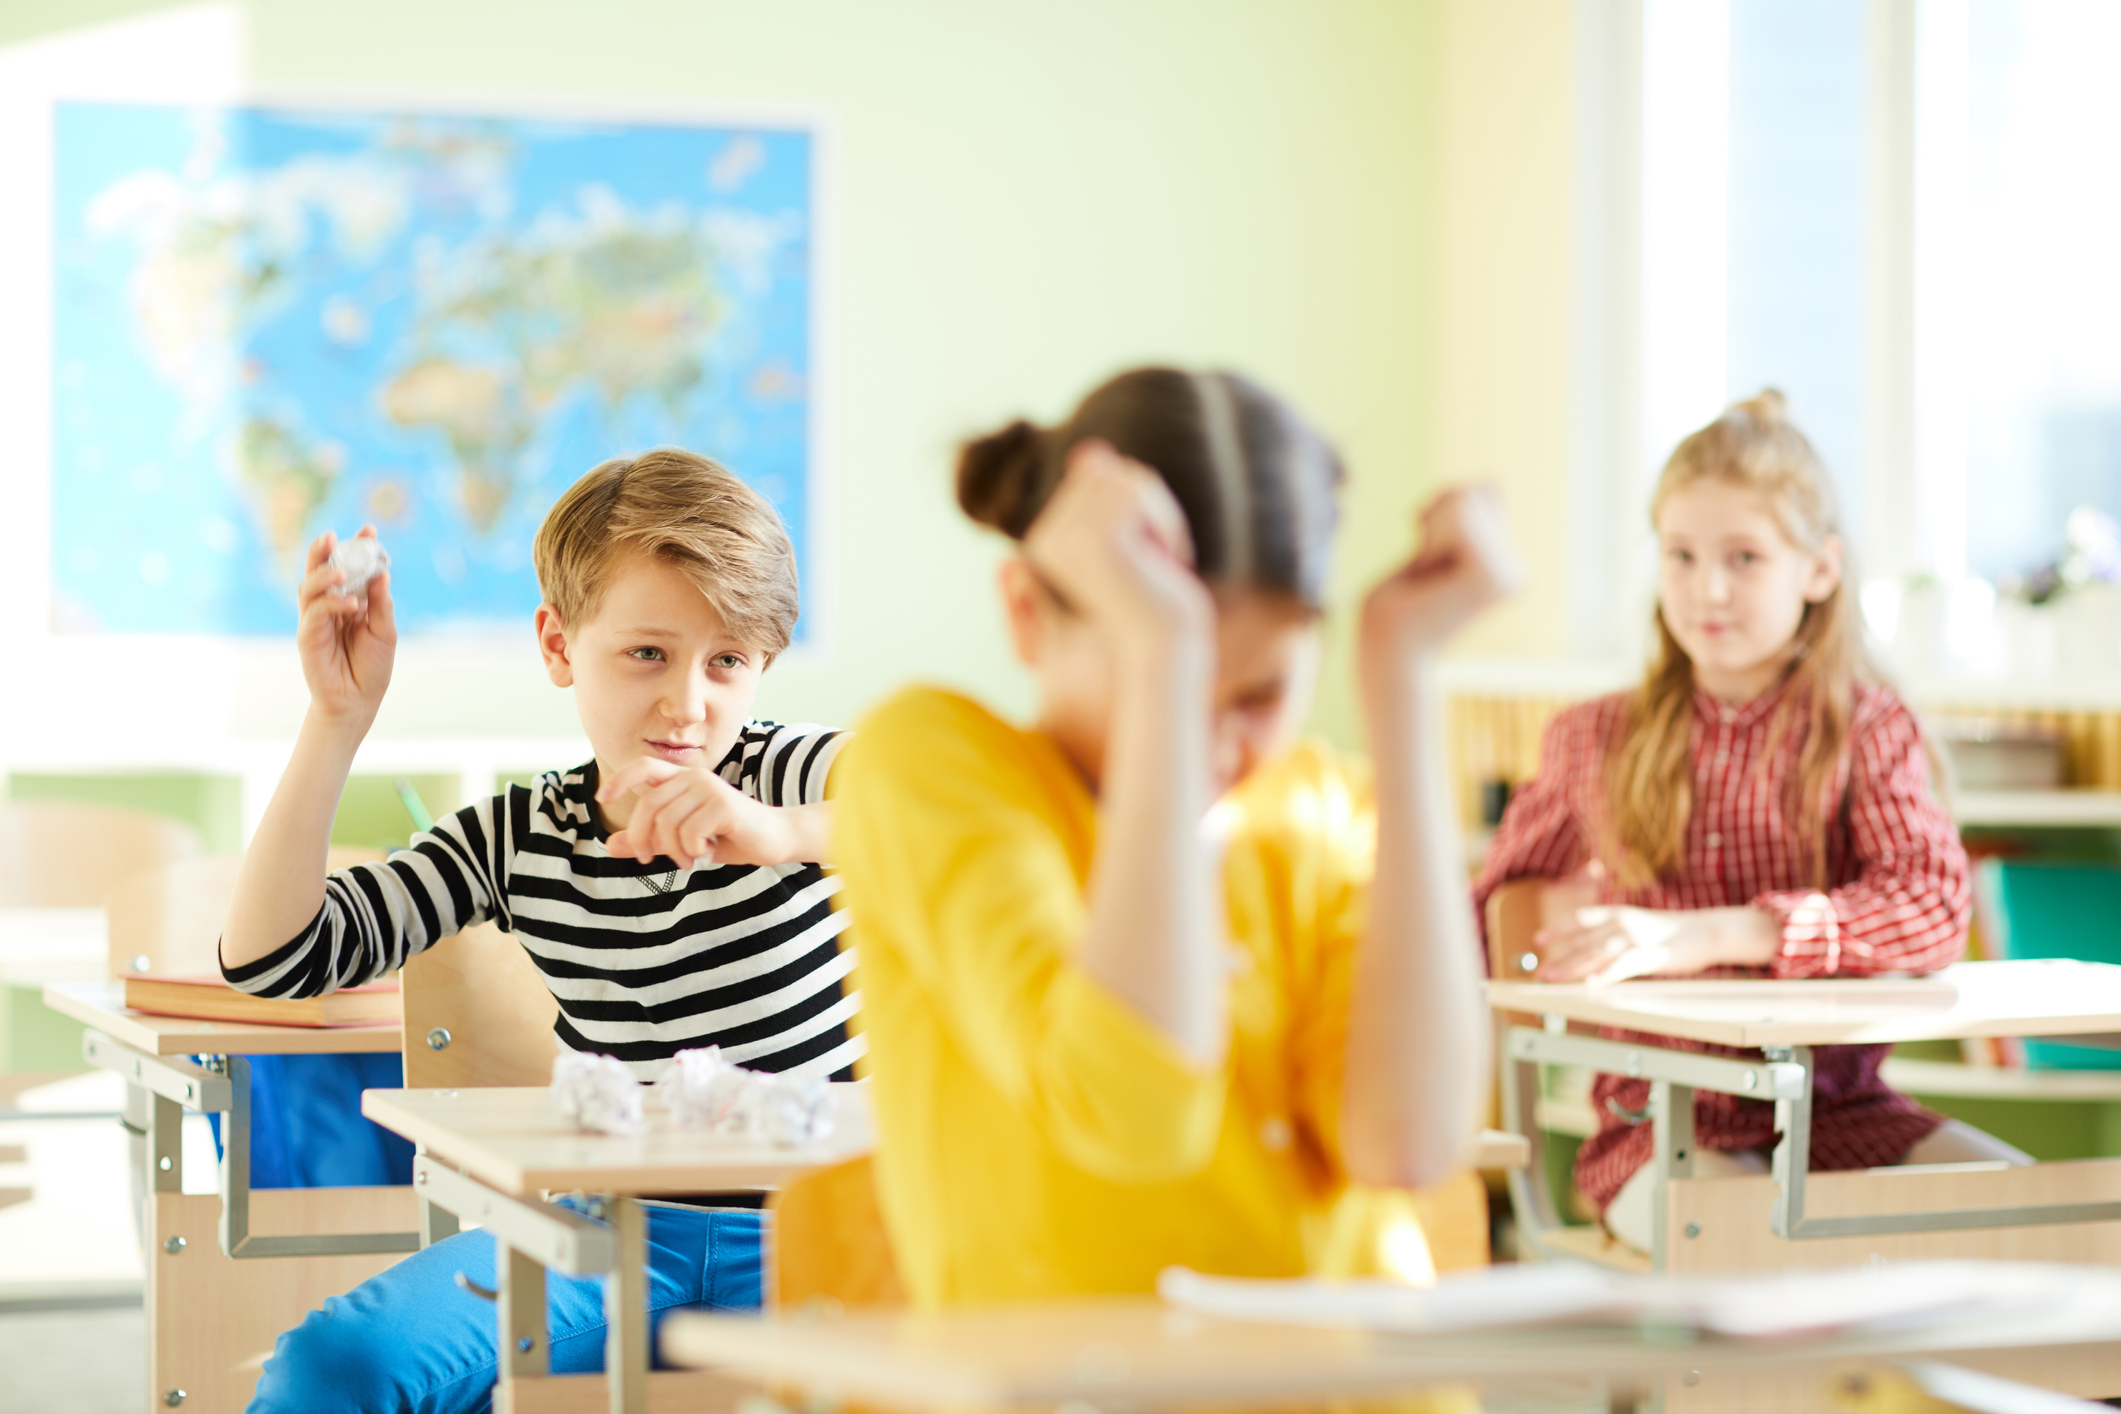 Oppositional Defiant Disorder in the Classroom